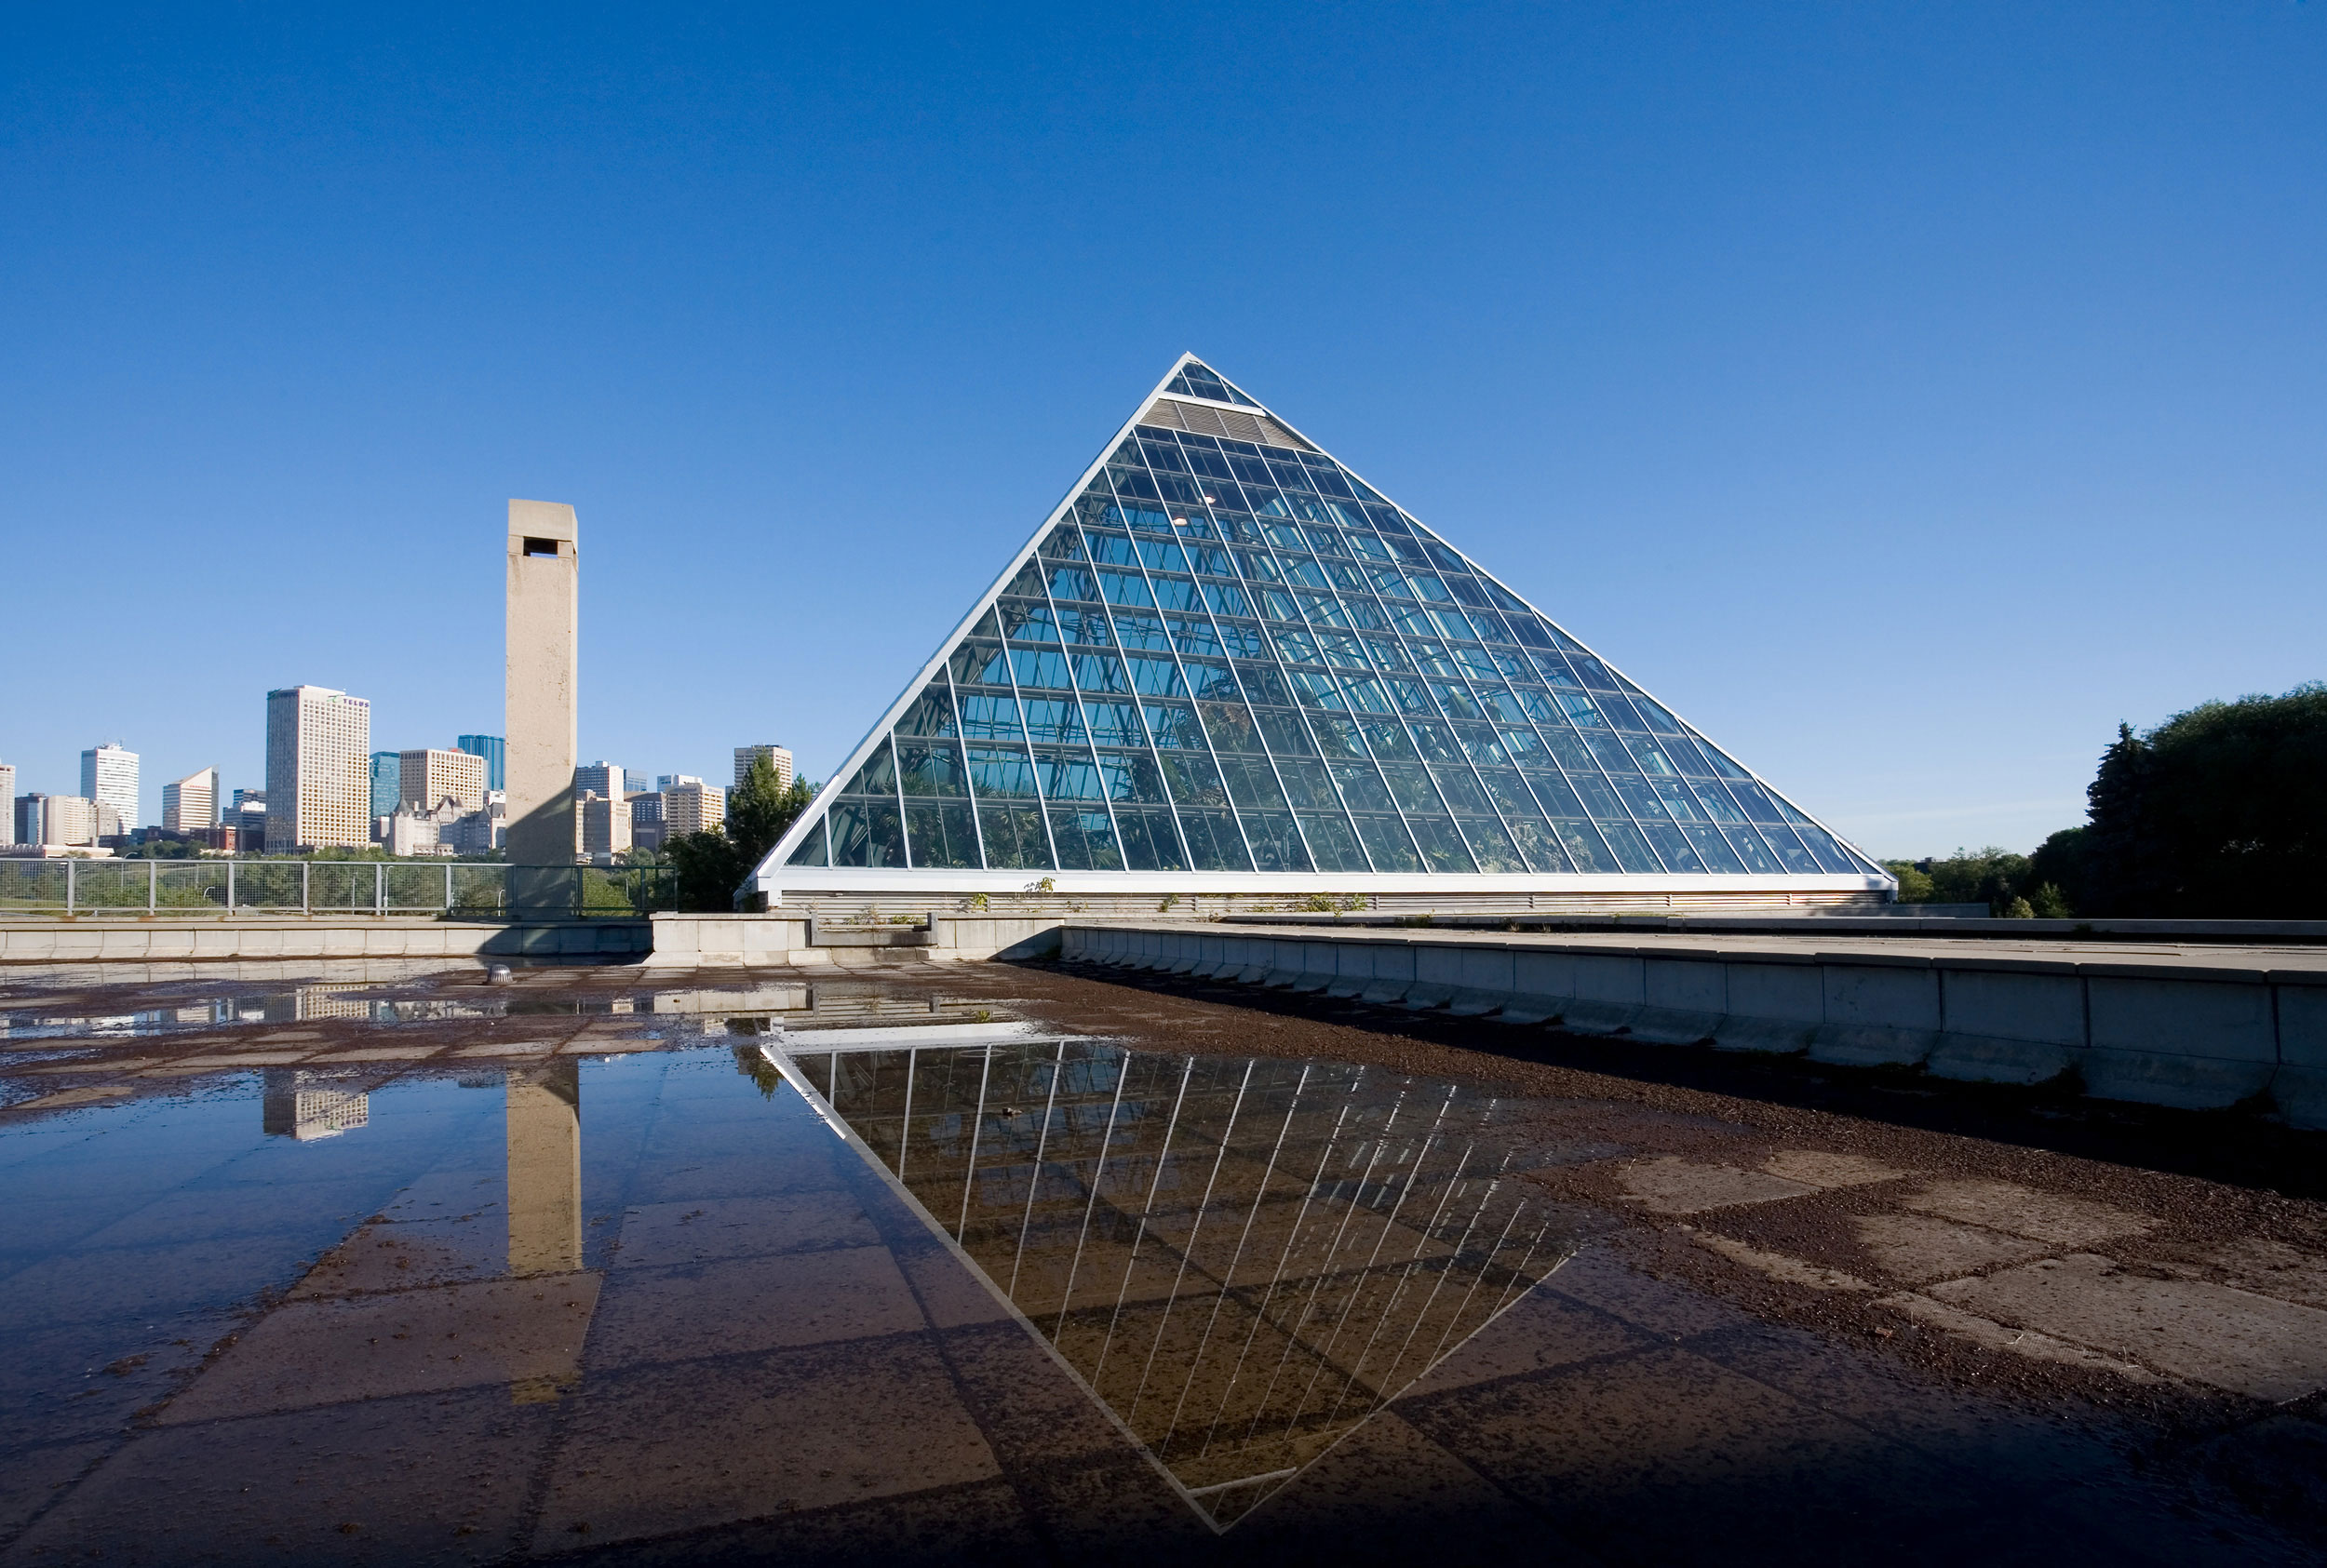 Reflection of Muttart Conservatory with Edmonton in back